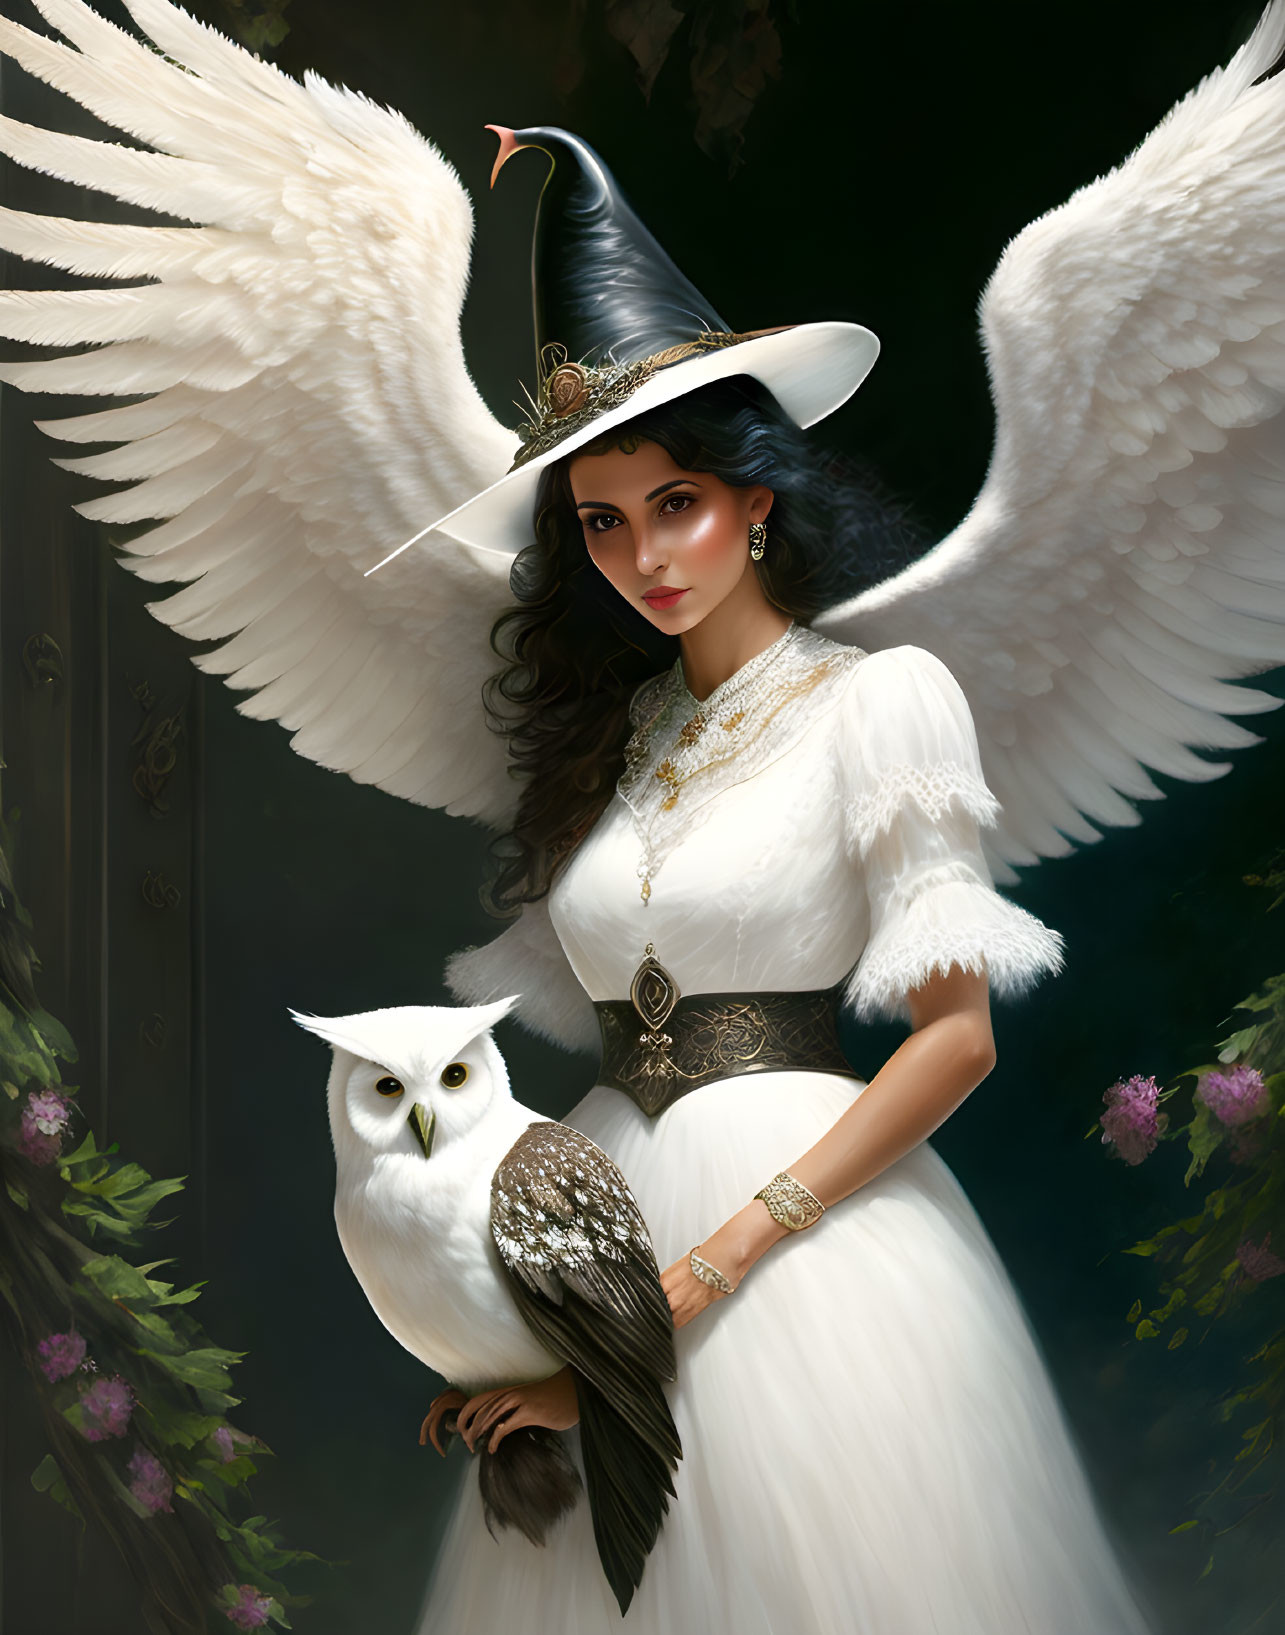 Illustrated woman with angel wings and witch's hat posing with white owl in elegant attire against dark floral